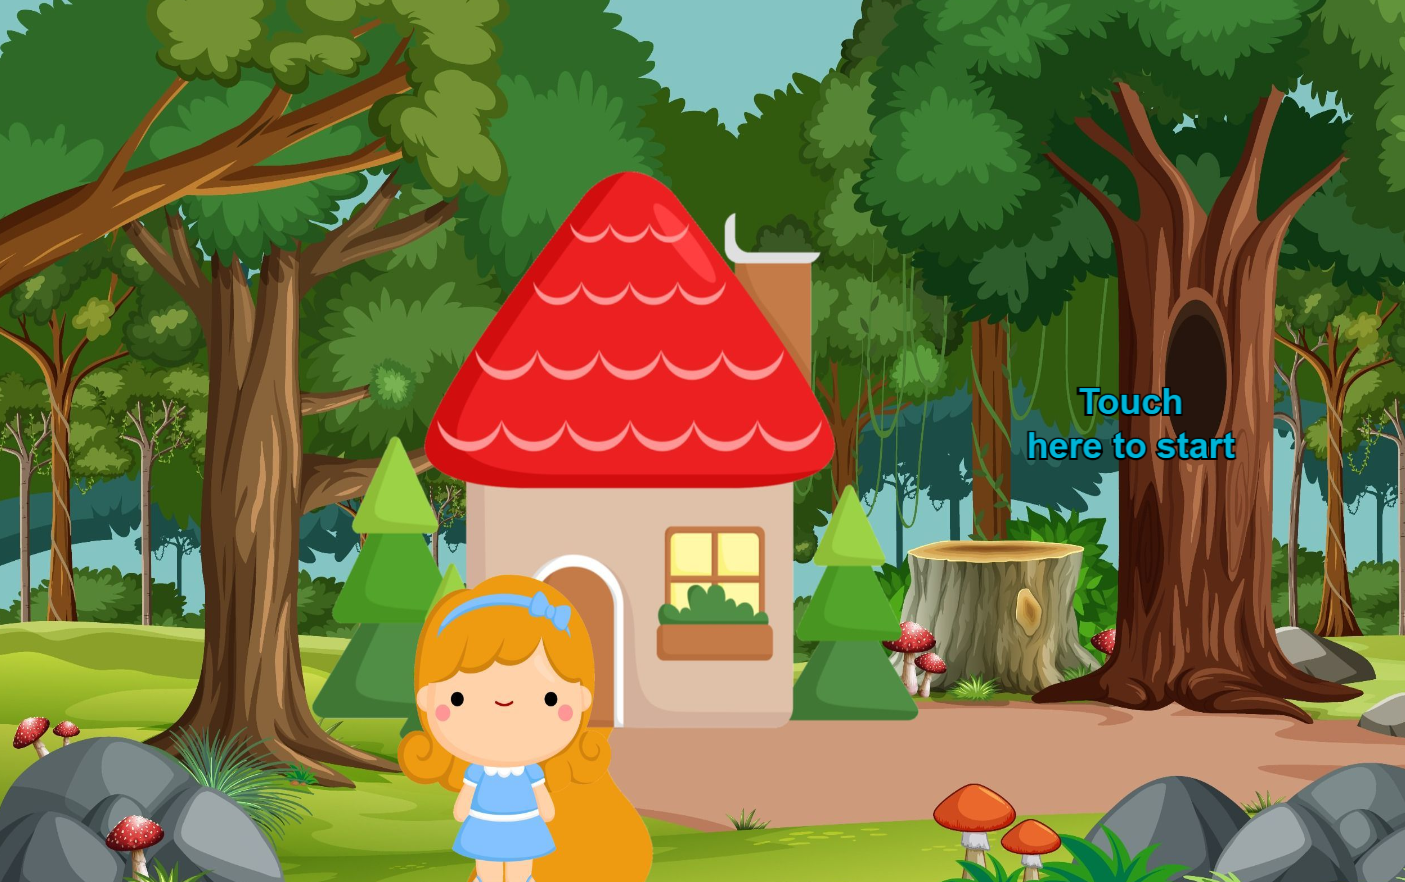 Cartoon type image of goldilocks and the three bears, this is an example of what can be created in the storyboard activity within the Imaginate software.